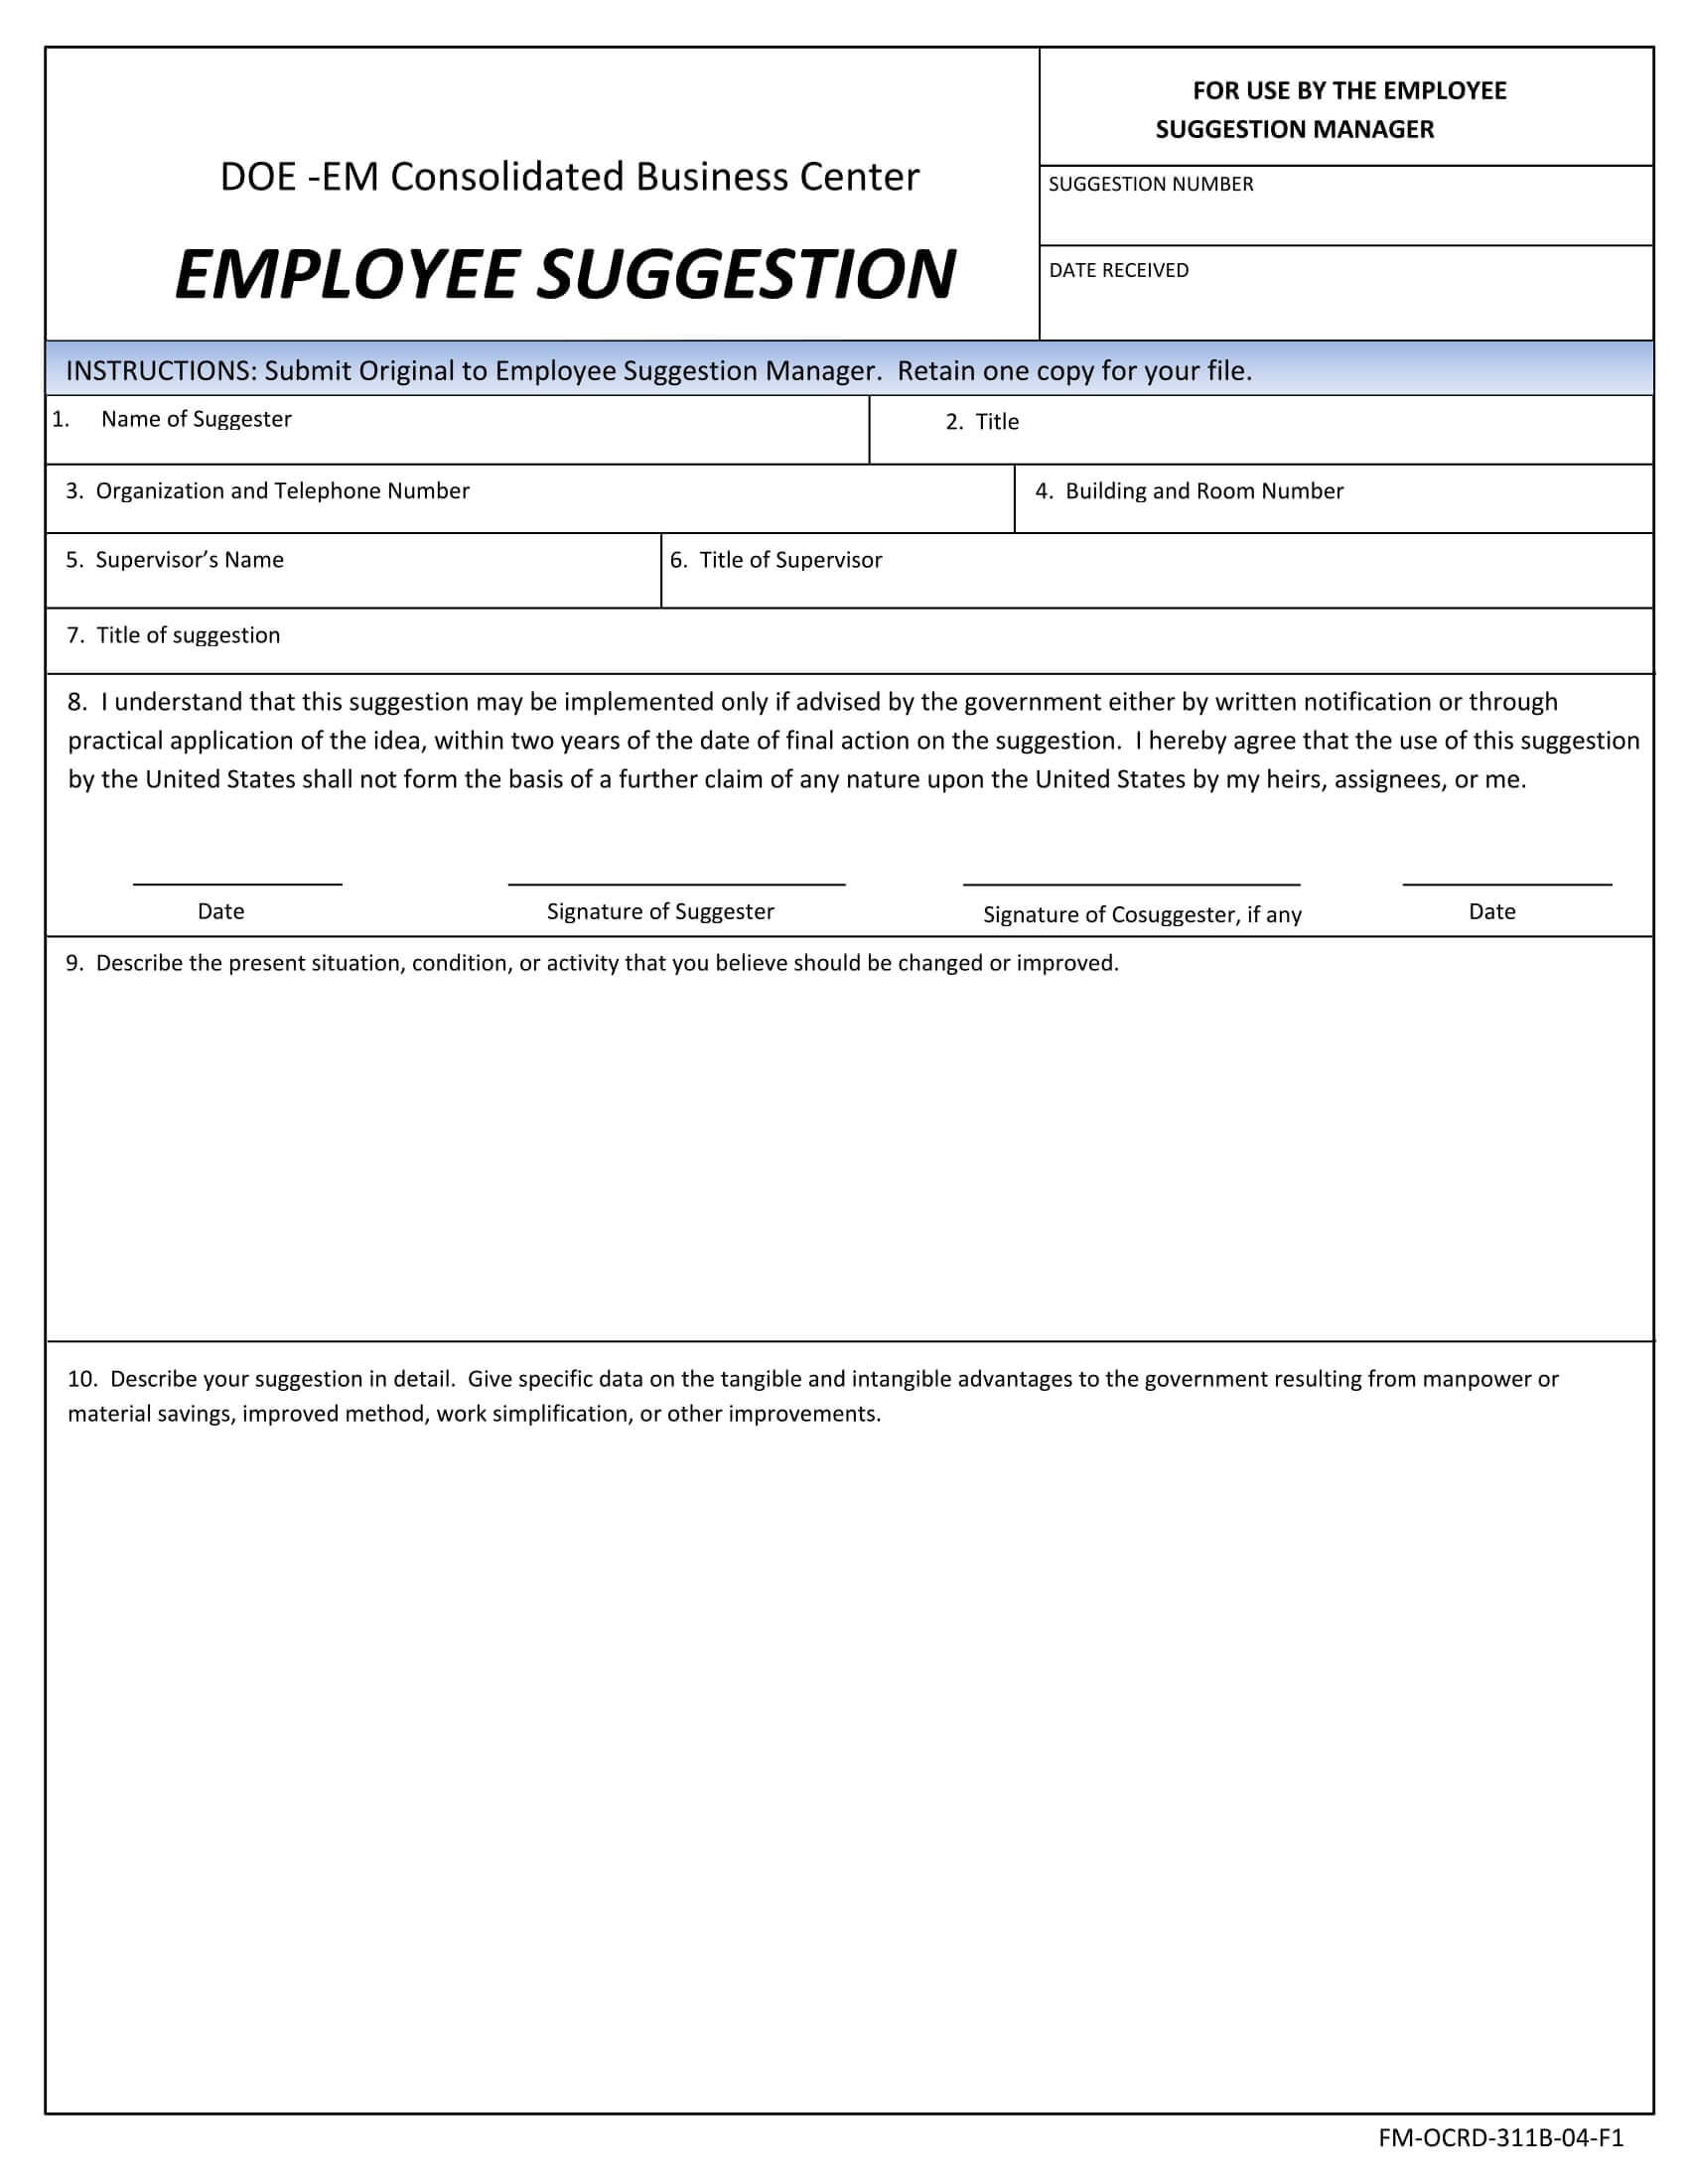 Free 14+ Employee Suggestion Forms In Word | Excel | Pdf Within Word Employee Suggestion Form Template